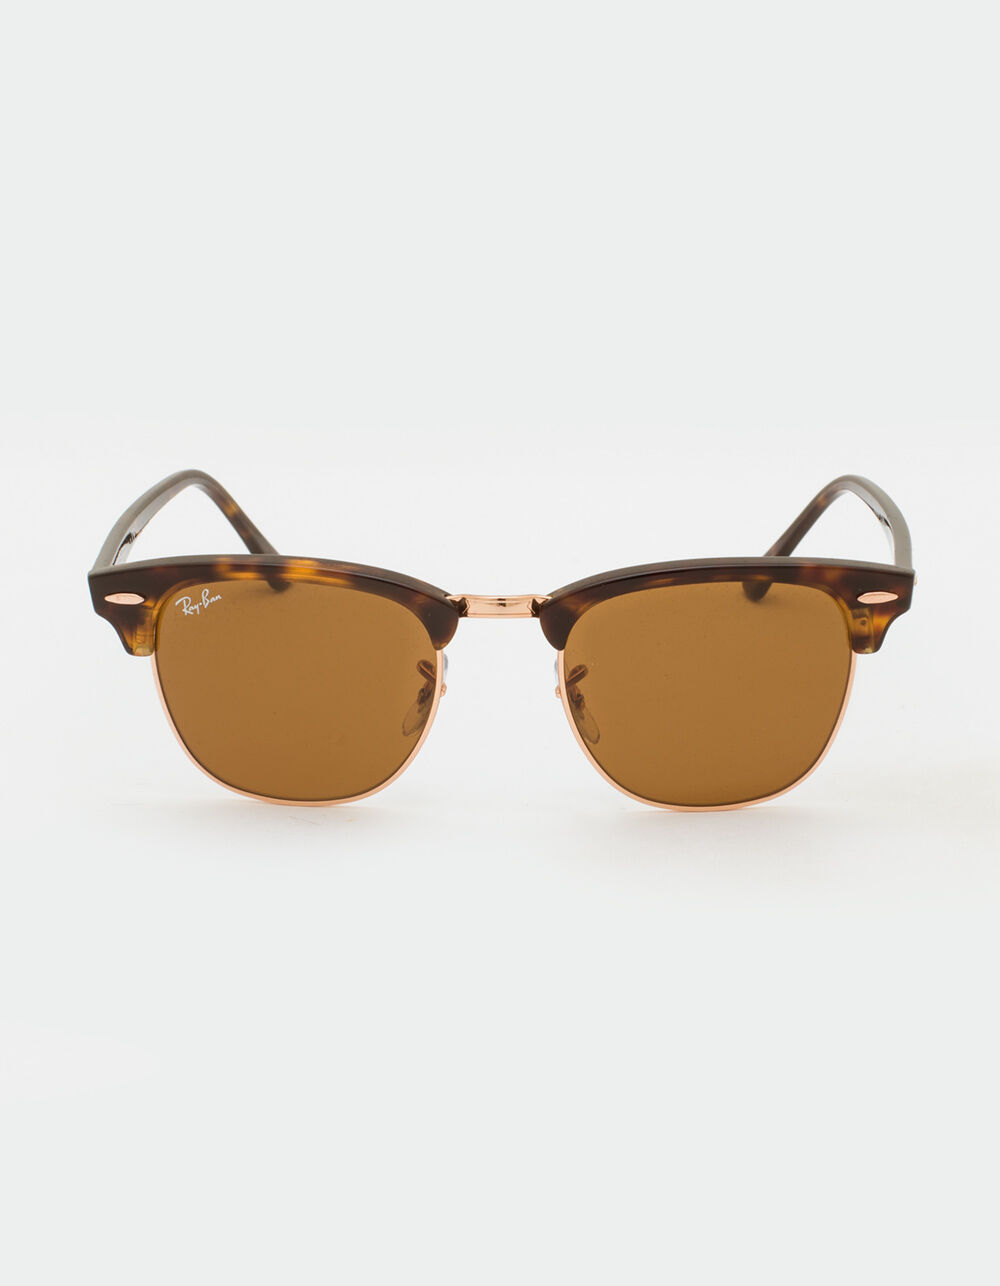 RAY-BAN Clubmaster Classic Sunglasses - TORTOISE | Tillys